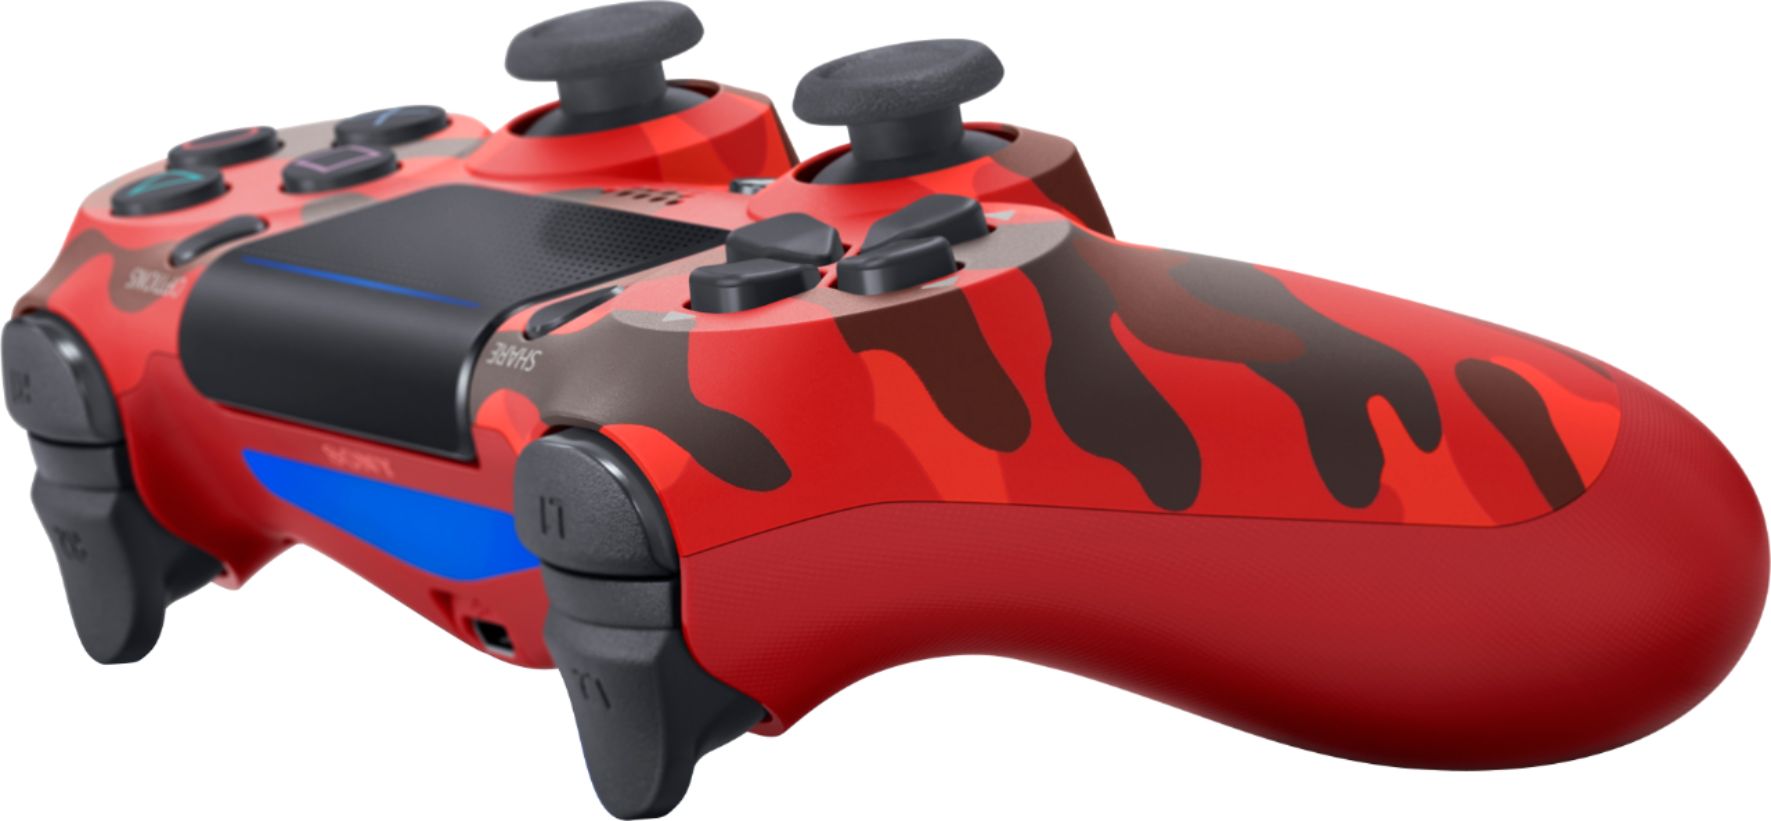 red ps4 controllers